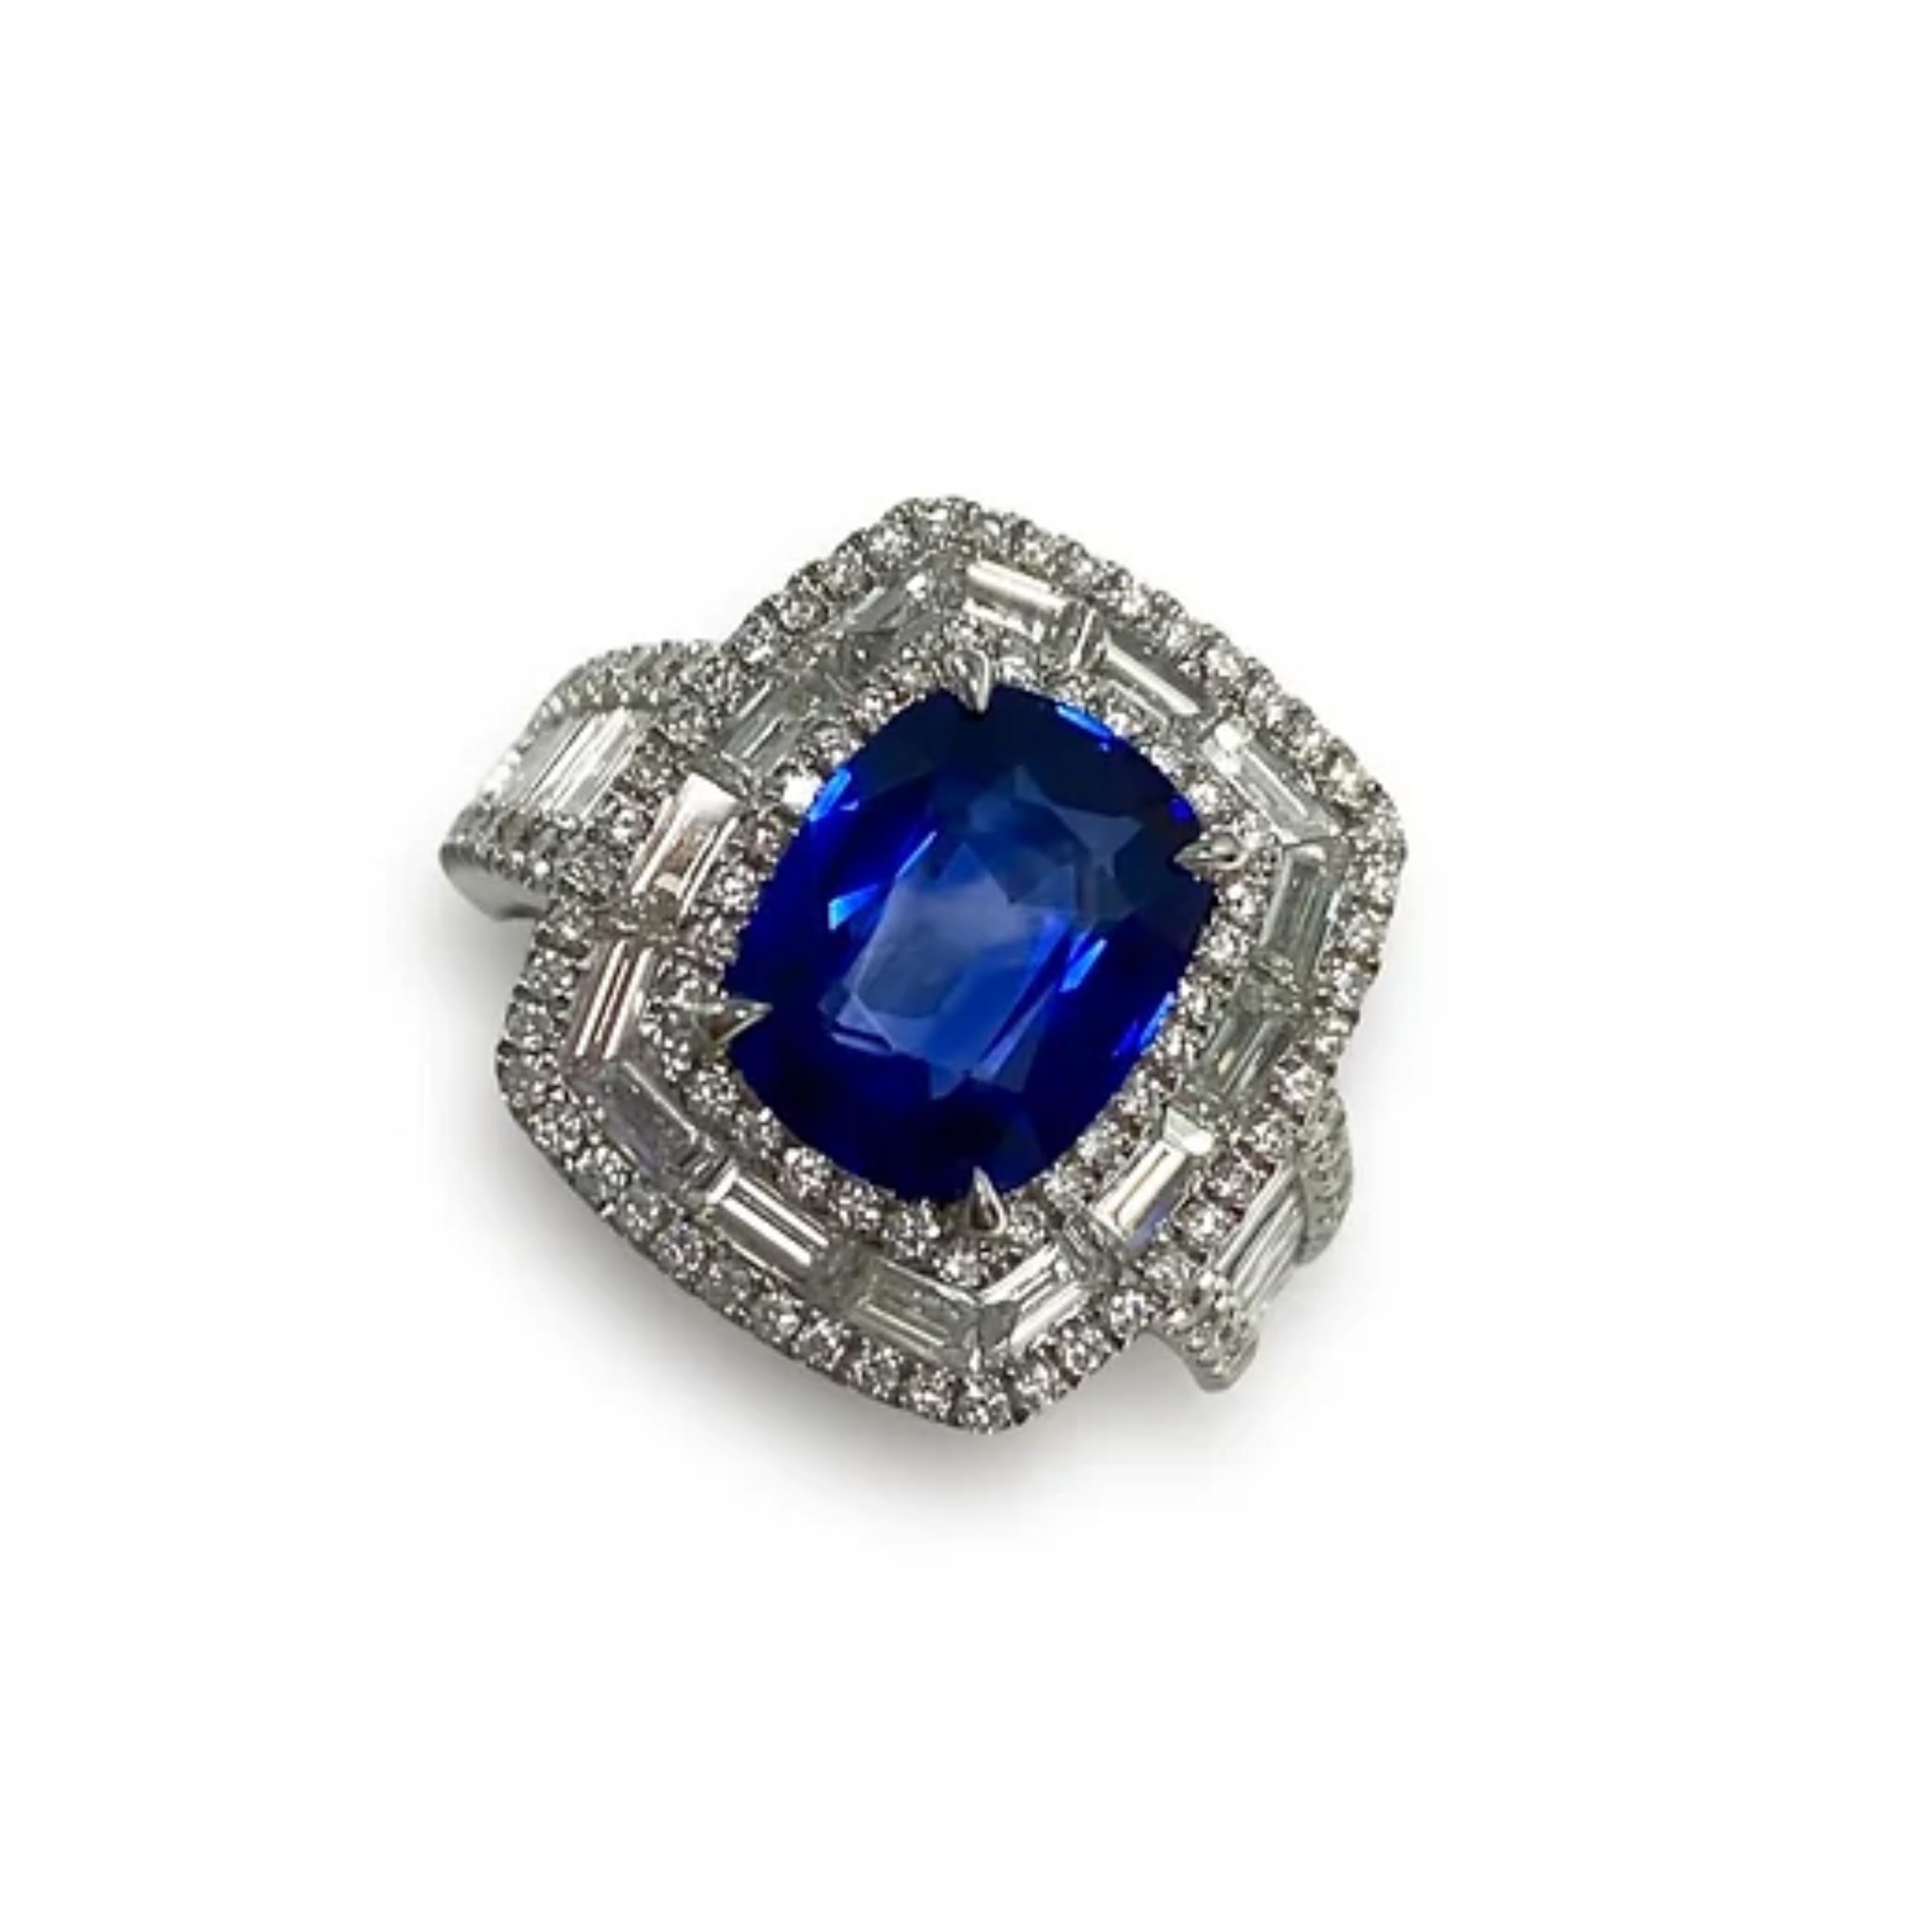 For Sale:  Antique 3 CT Natural Sapphire Diamond Engagement Band in 18K Gold, Cocktail Ring 4